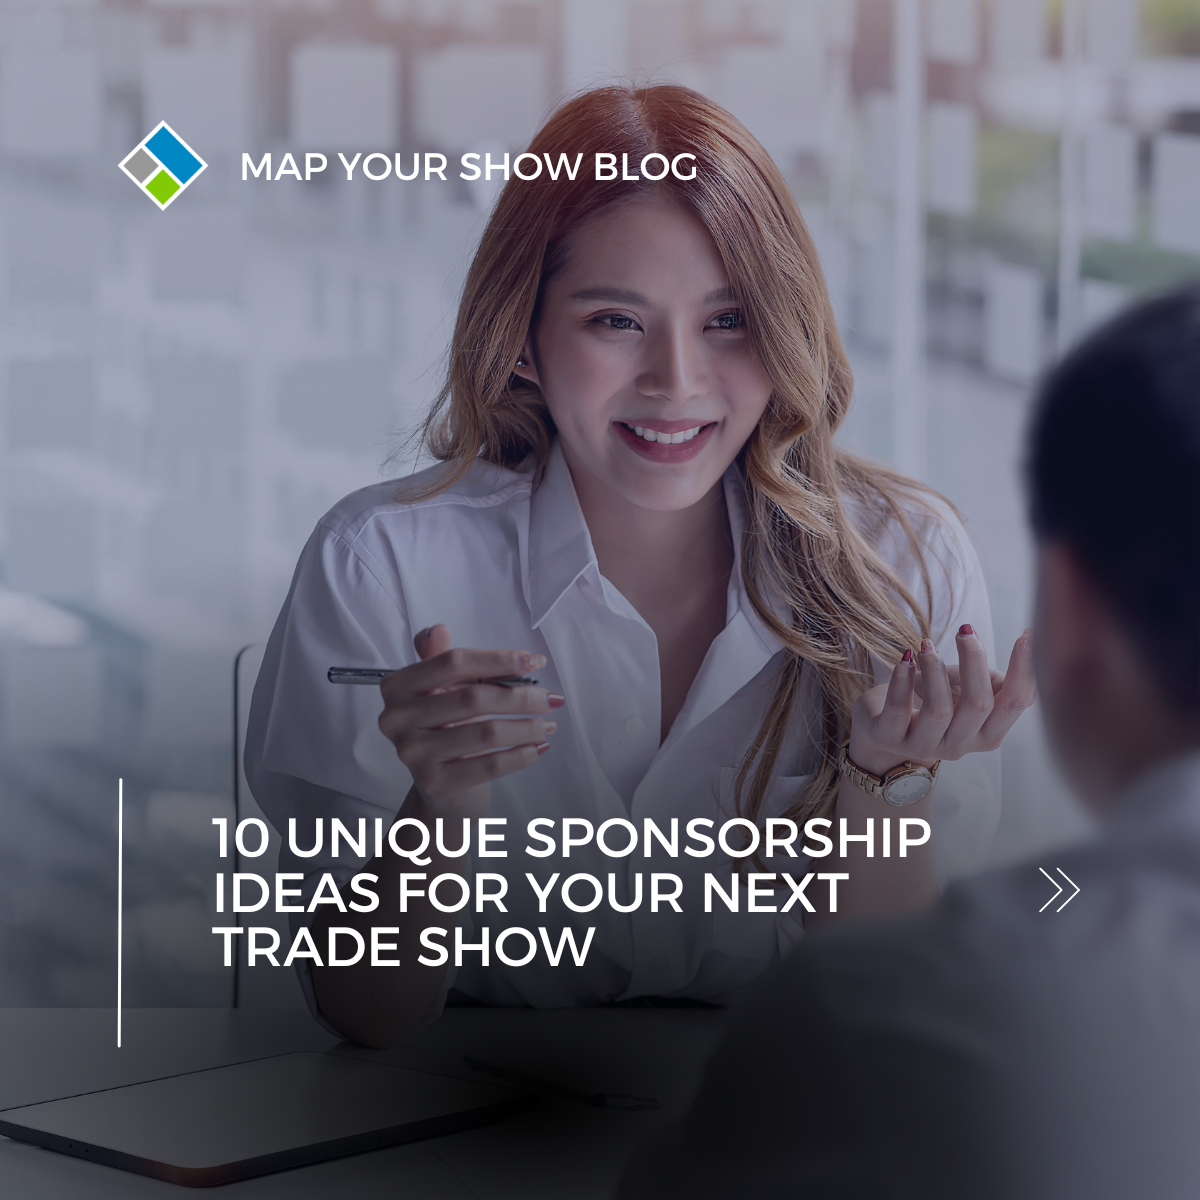 10 unique sponsorship ideas for your trade show and expo or corporate event